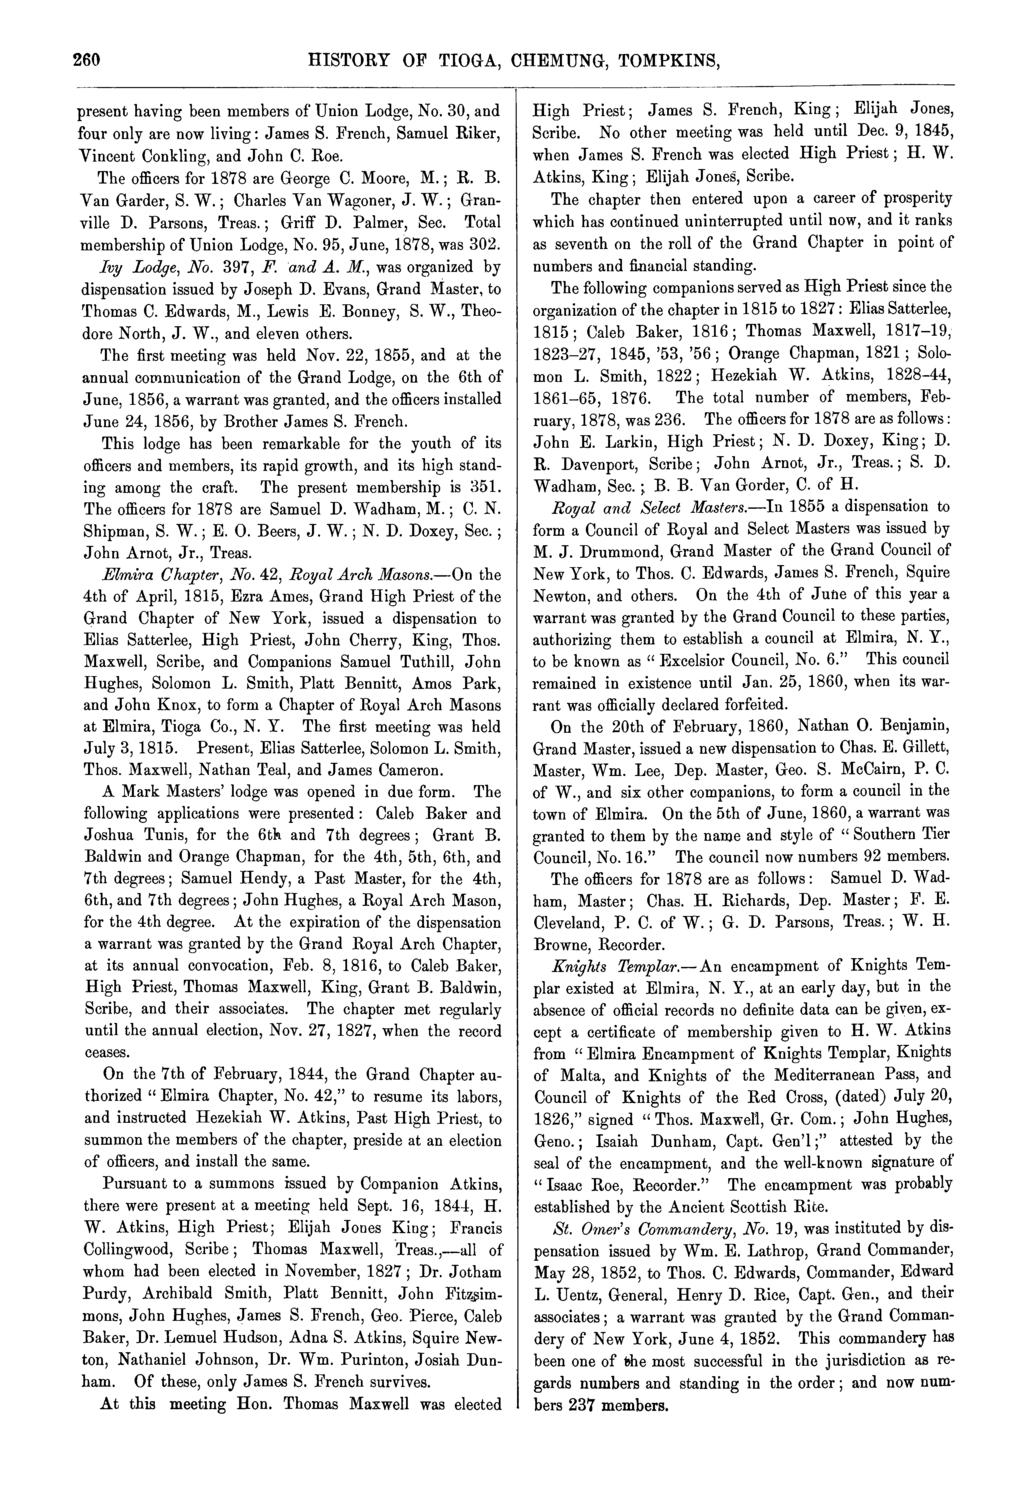 ; 260 HISTORY OF TIOGA, CHEMUNG, TOMPKINS, present having been members of Union Lodge, No. 30, four only are now living : James S. French, Samuel Riker, Vincent Conkling, John C. Roe.